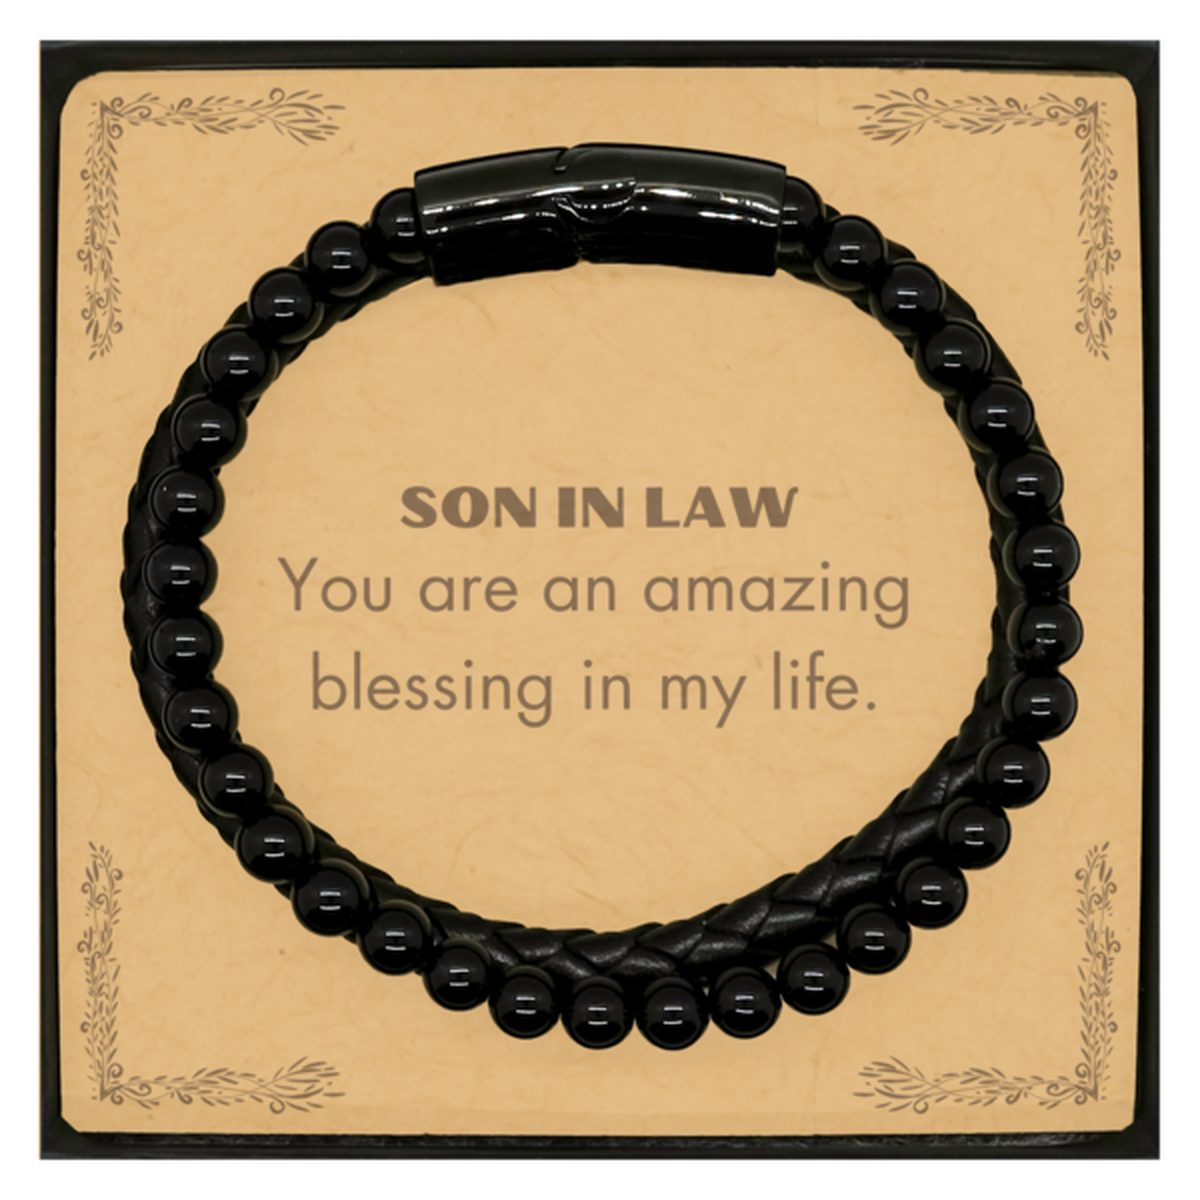 Son In Law Stone Leather Bracelets, You are an amazing blessing in my life, Thank You Gifts For Son In Law, Inspirational Birthday Christmas Unique Gifts For Son In Law